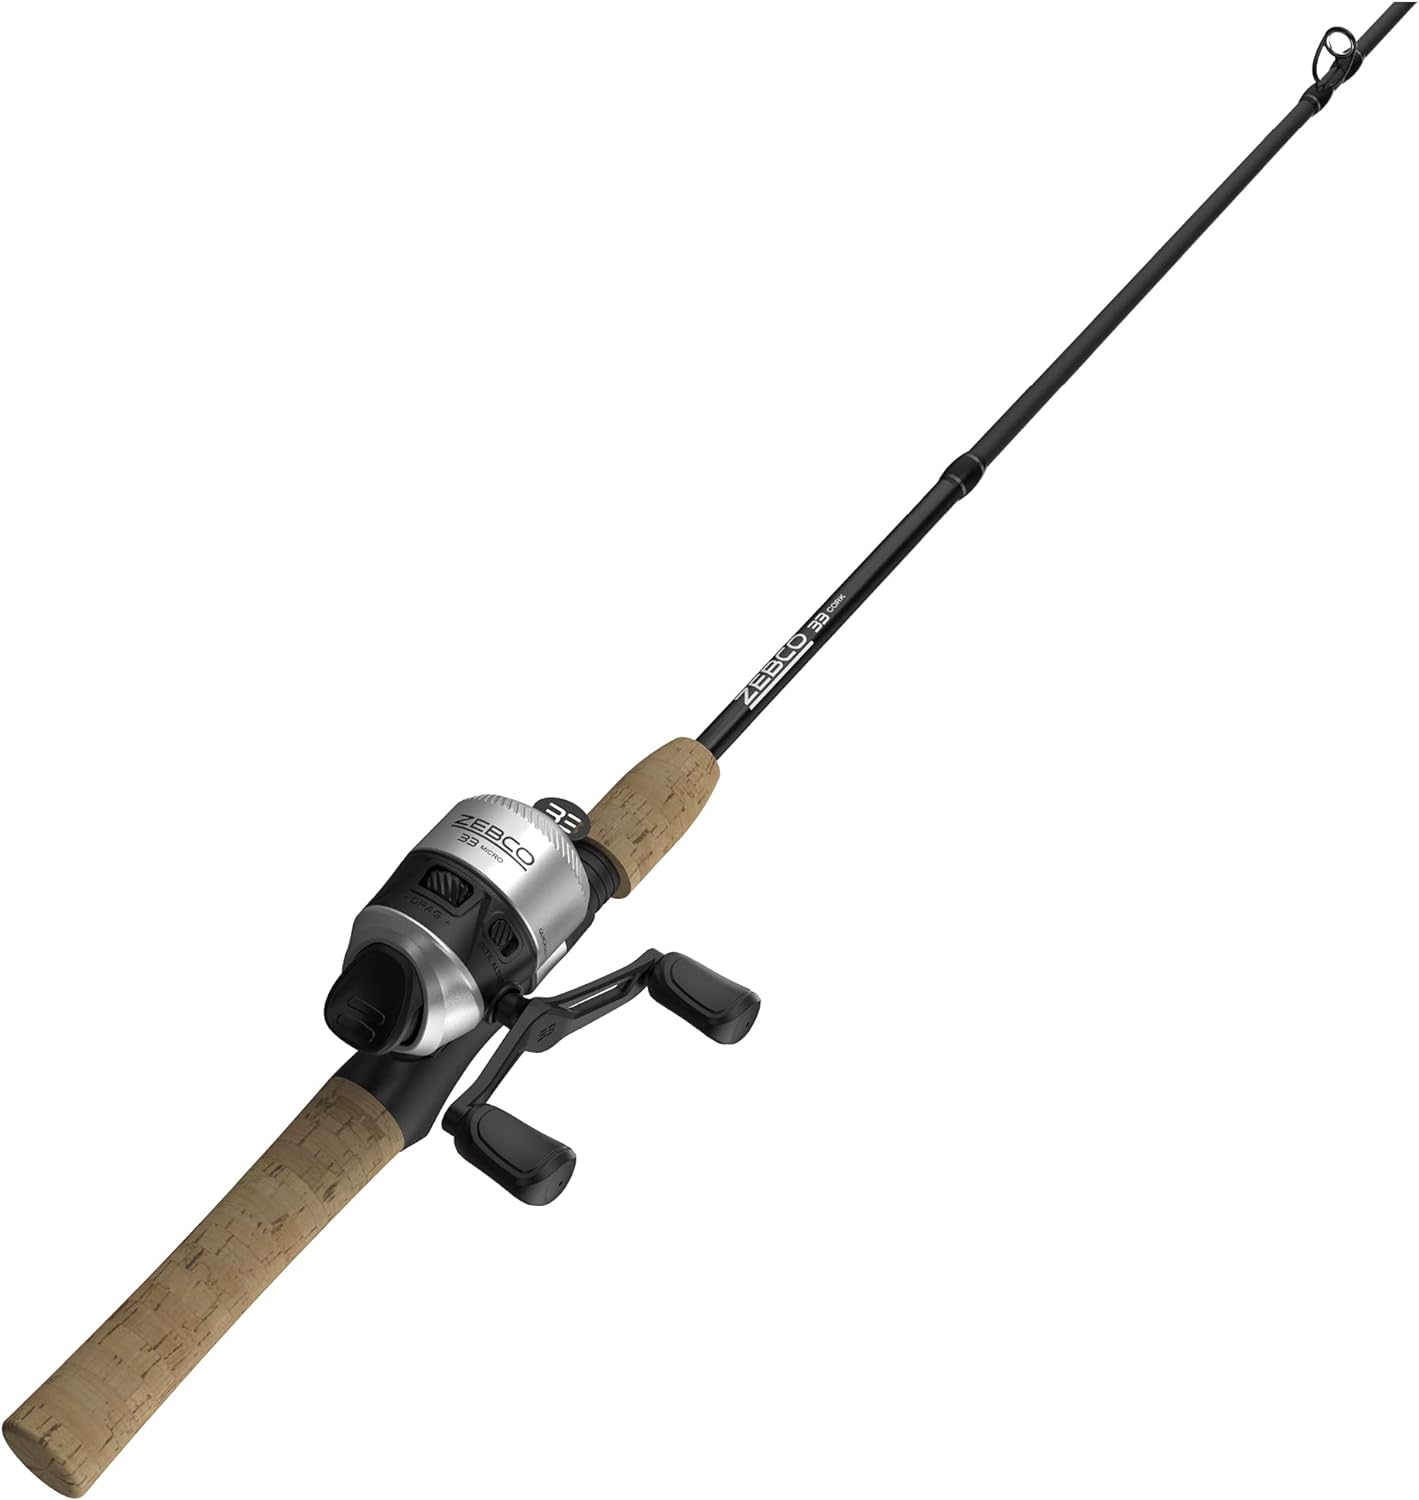 IGN Deals on X: Zebco 33 Cork Reel and Fishing Rod Combo is on